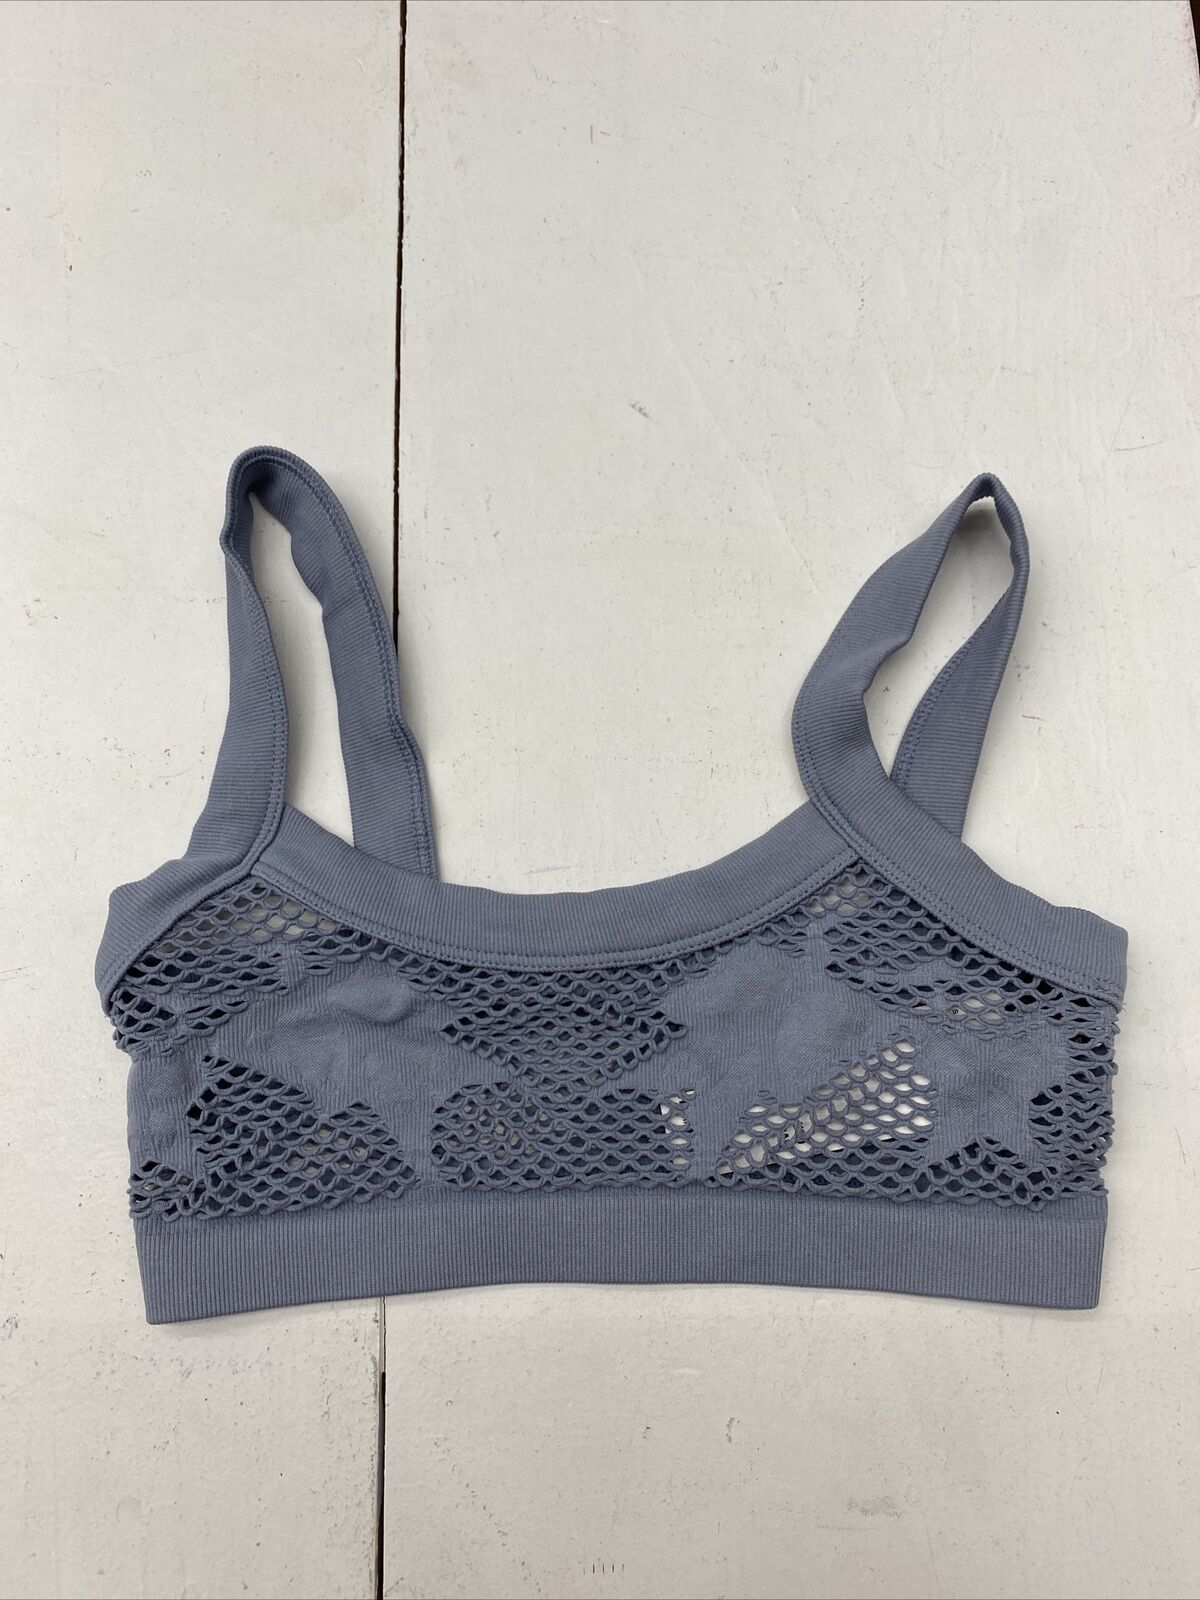 Aerie Garden Party Strappy Lace Bralette Gray Size L - $12 (70% Off Retail)  - From Eryn